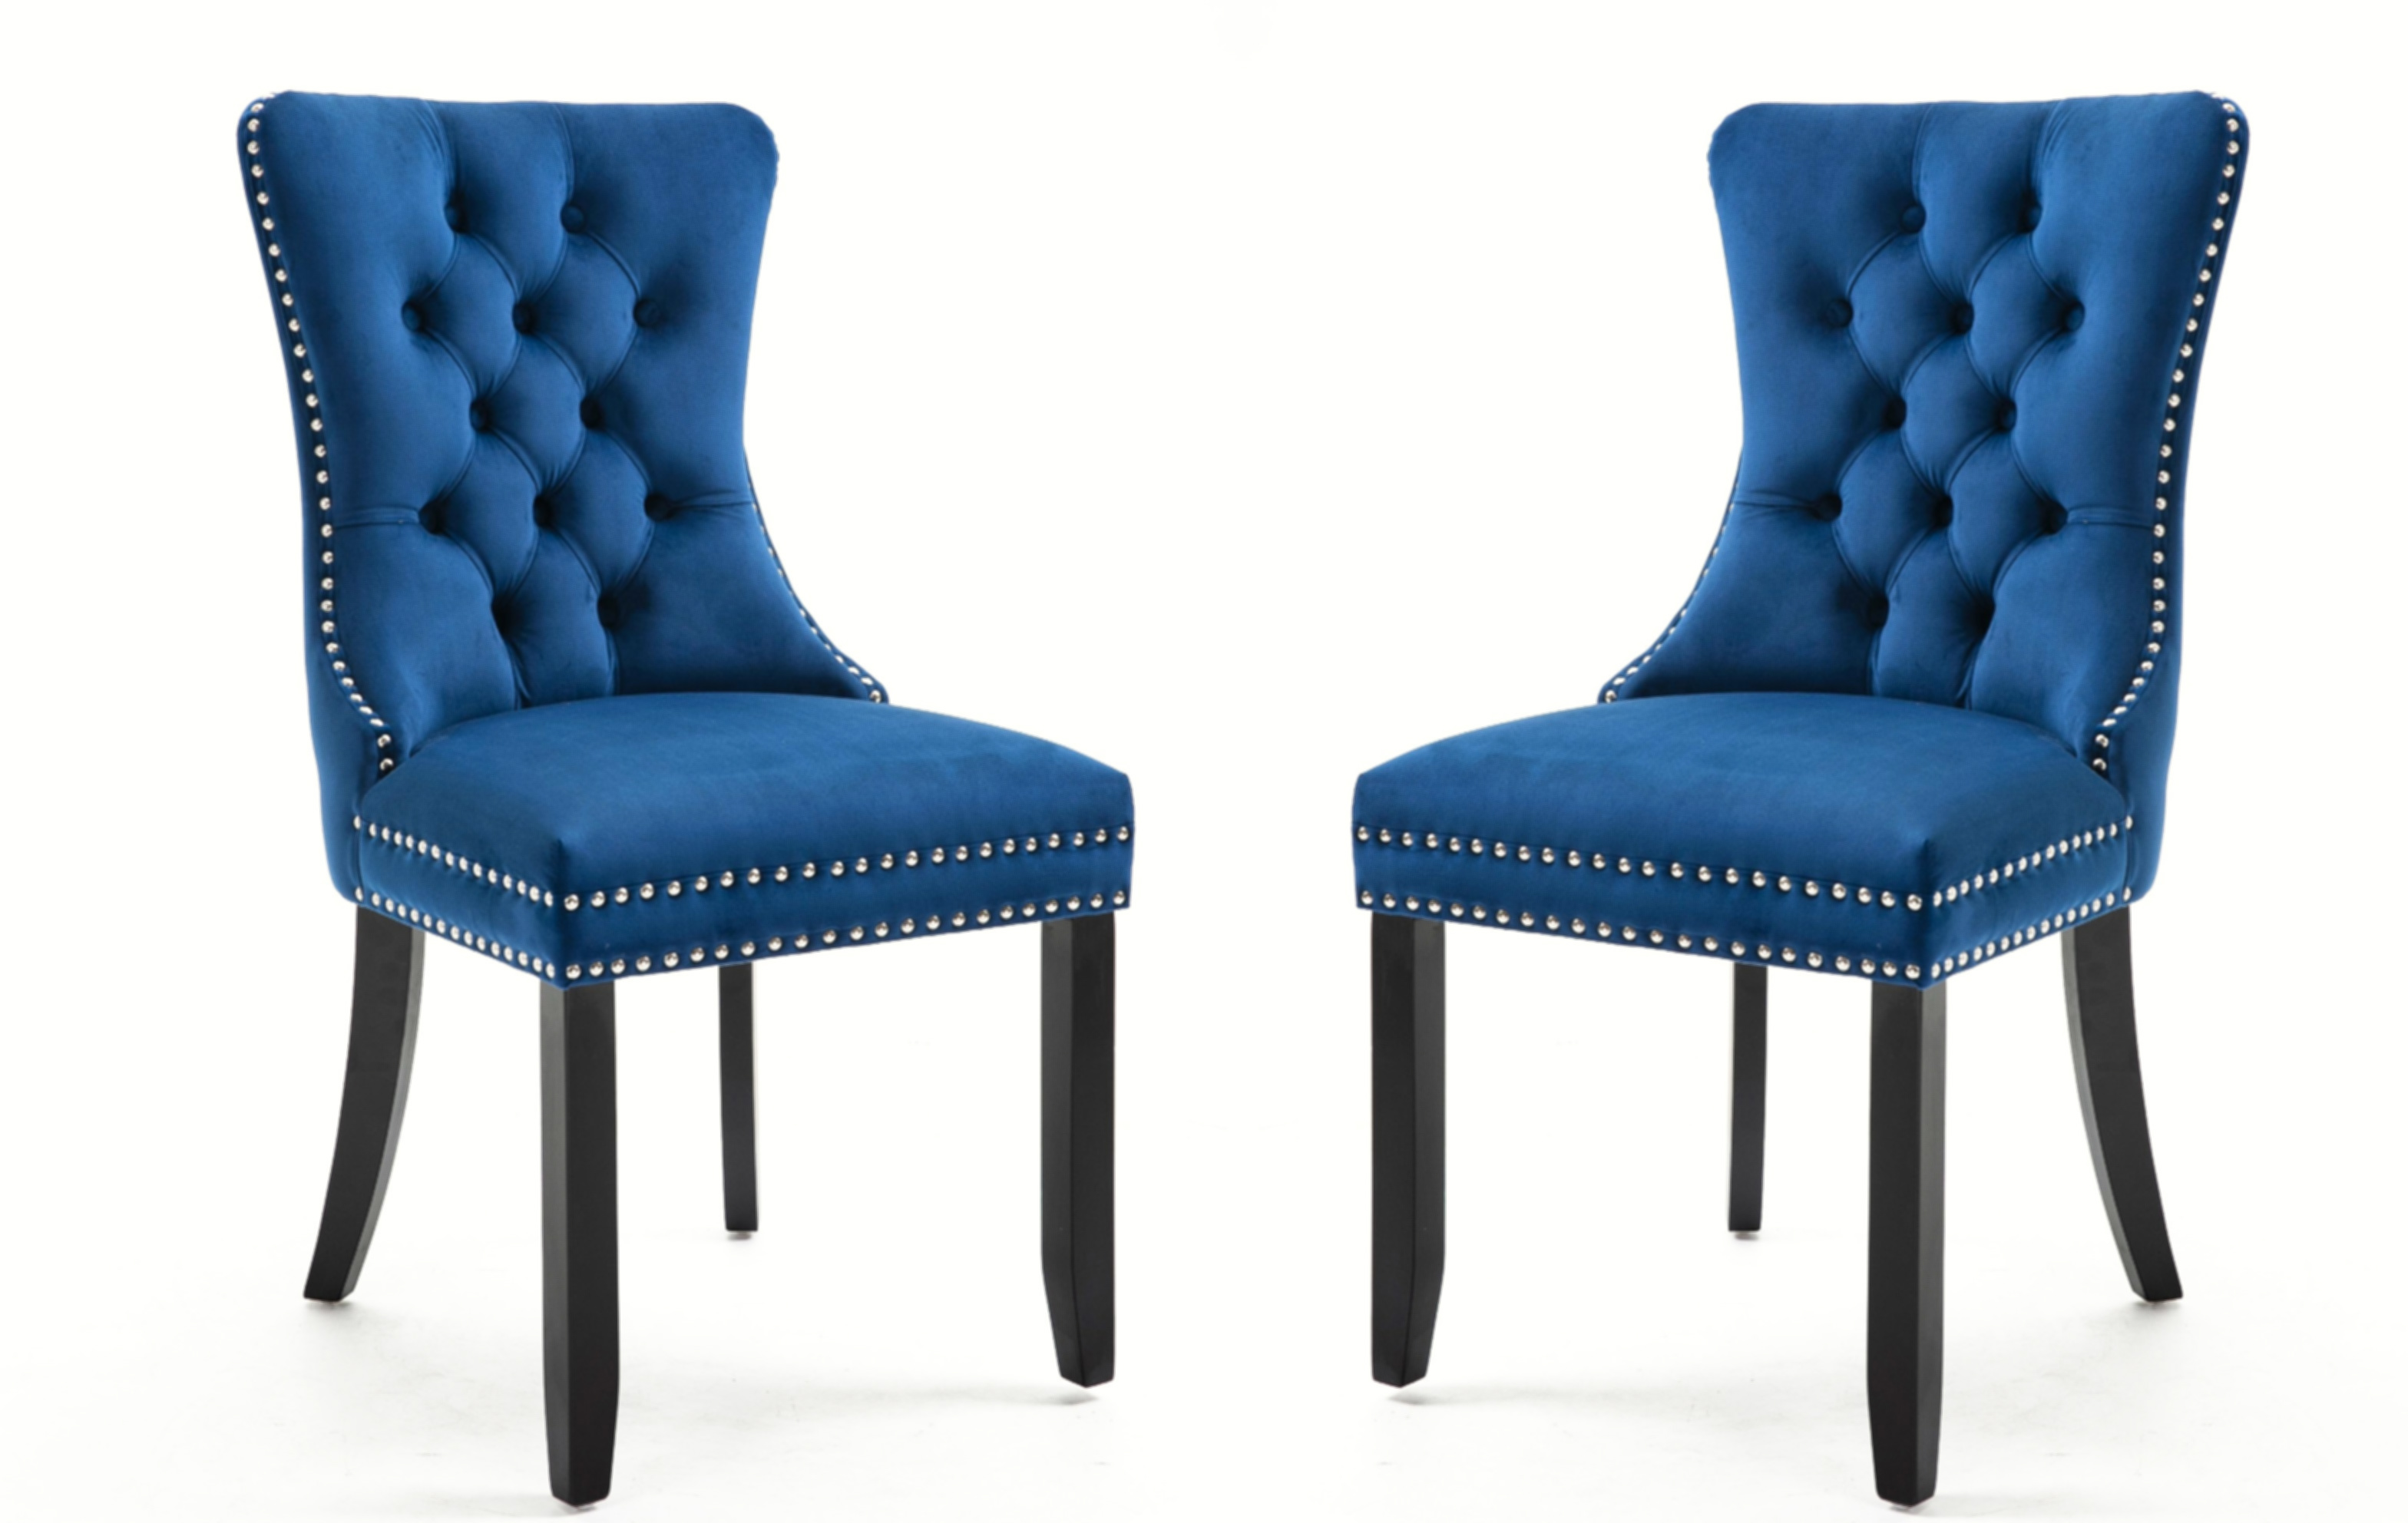 High-end Tufted Solid Wood Upholstered Blue Dining Chair with Nailhead Trim 2 PCS-CASAINC